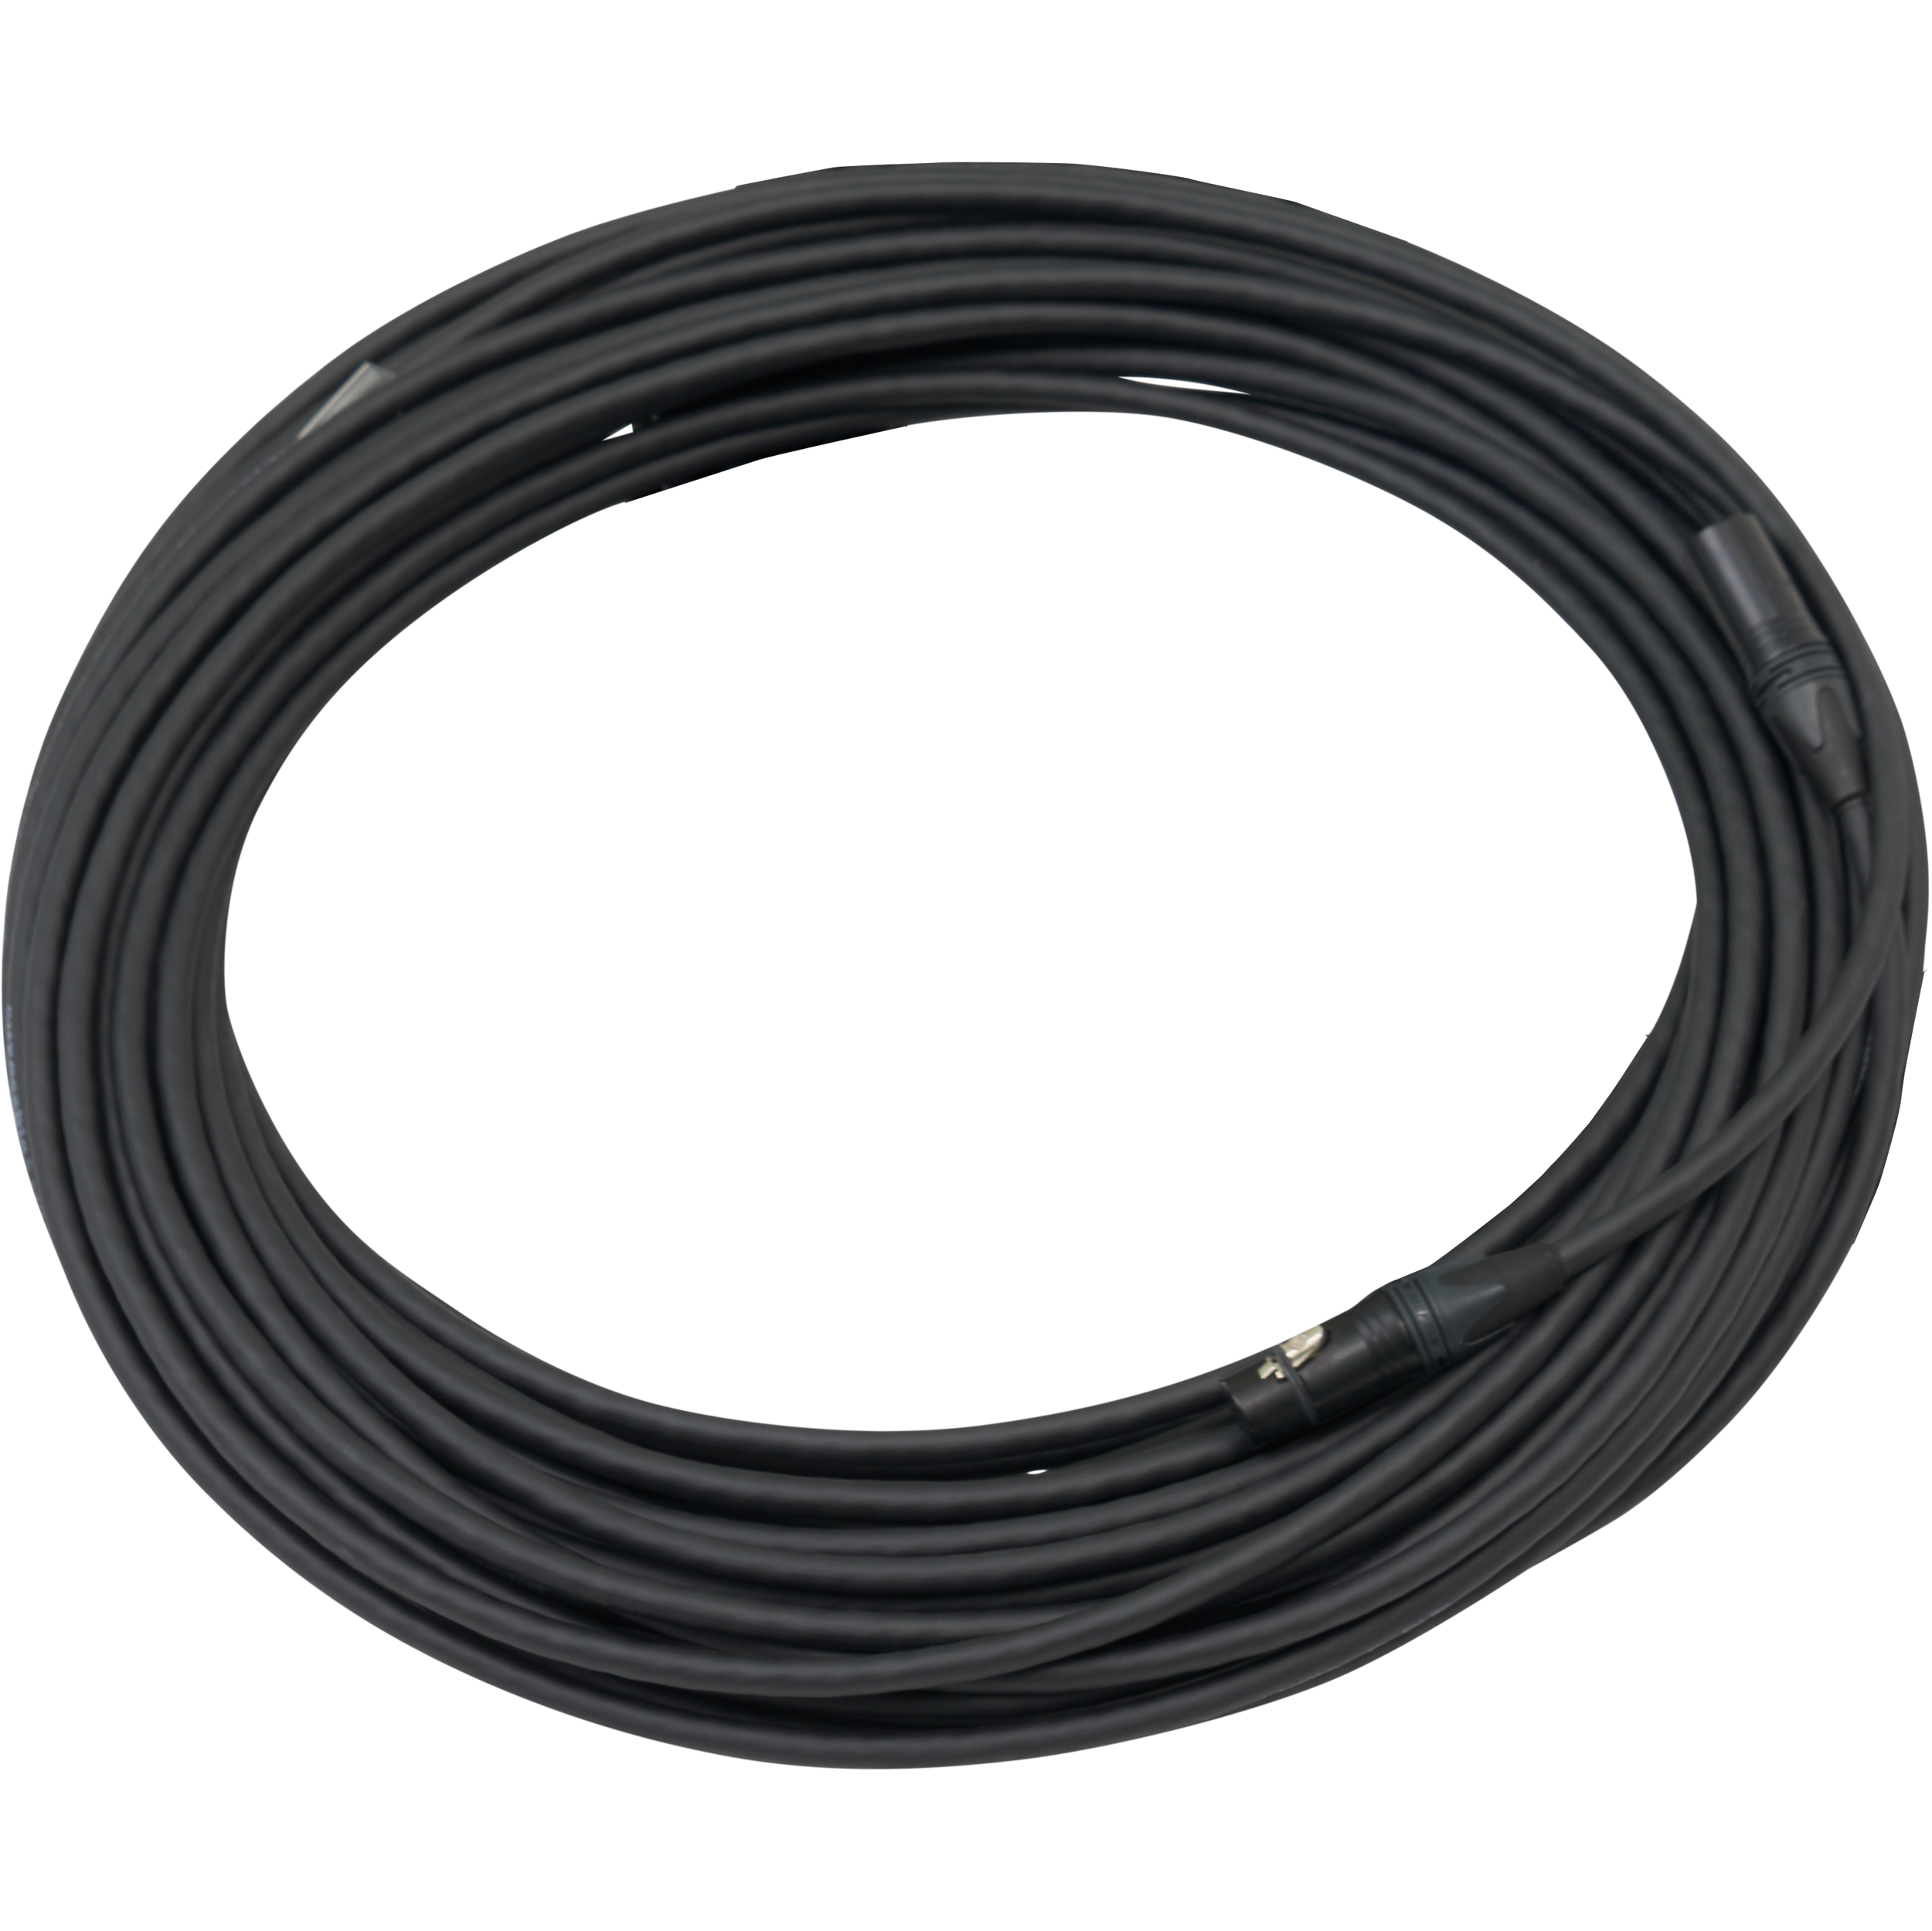 BYFP 5-Pin DMX Cable